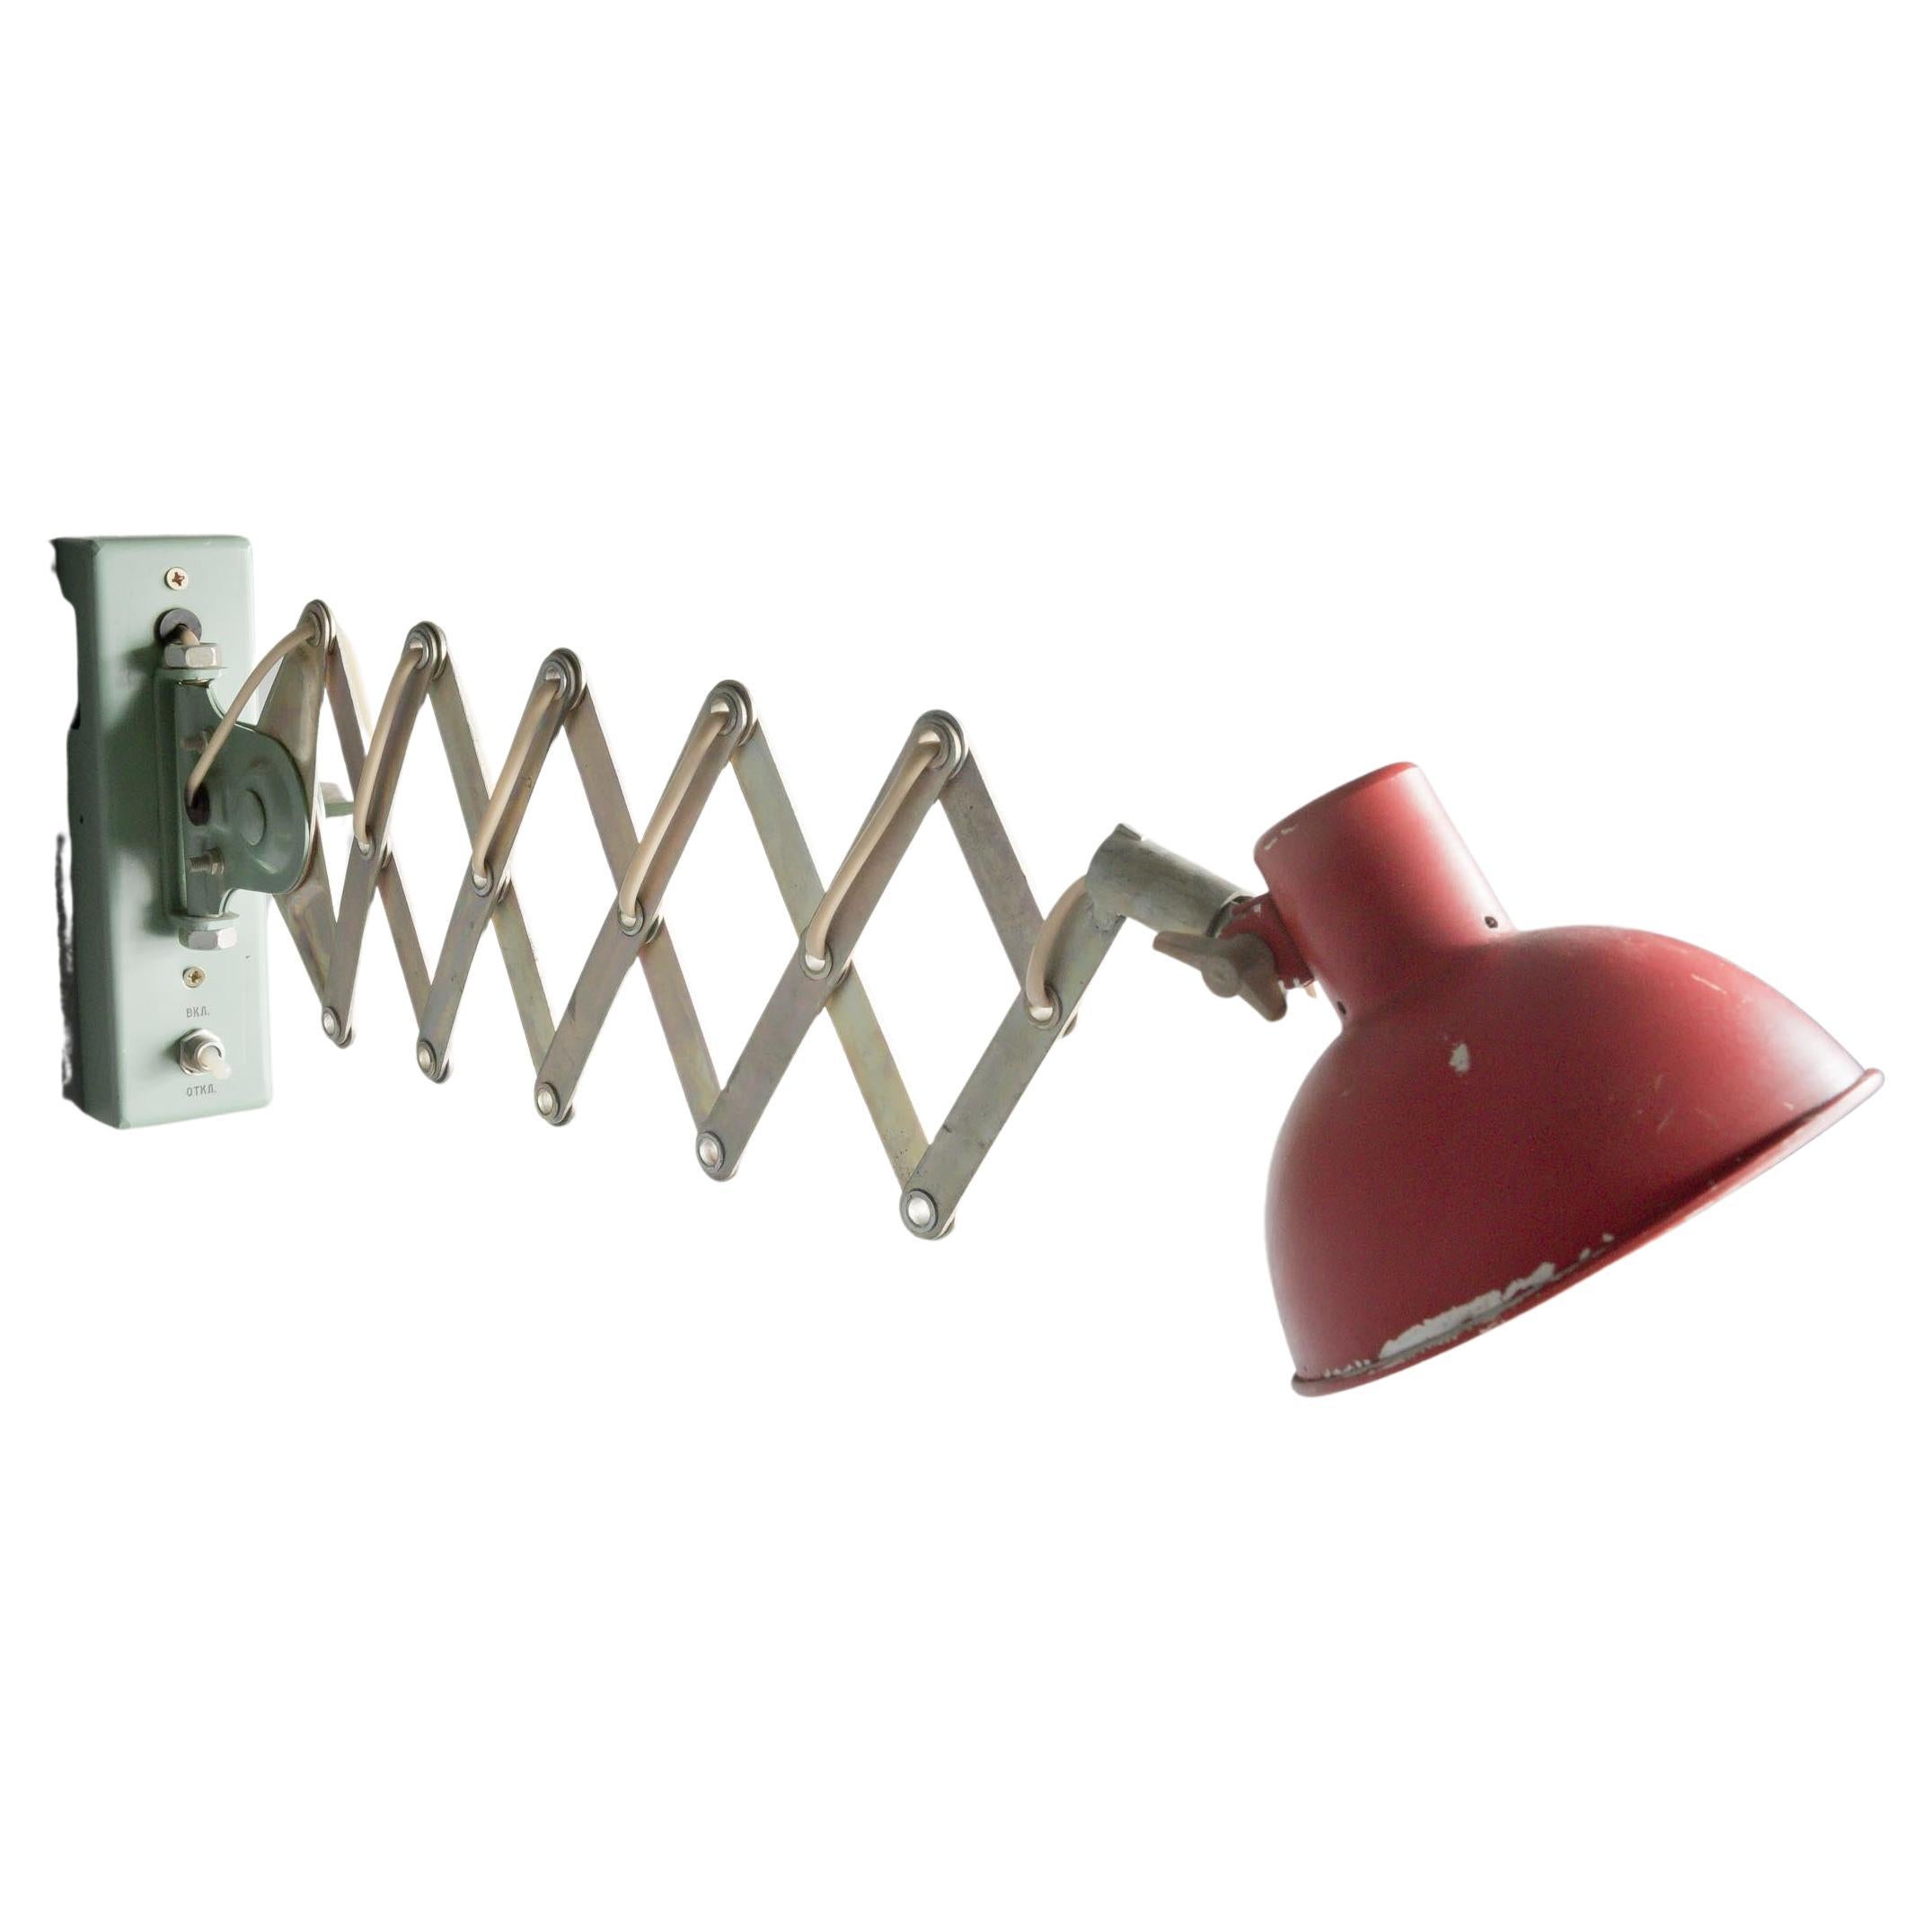 10 Eastern European Scissor Action Expandable Wall Lights For Sale